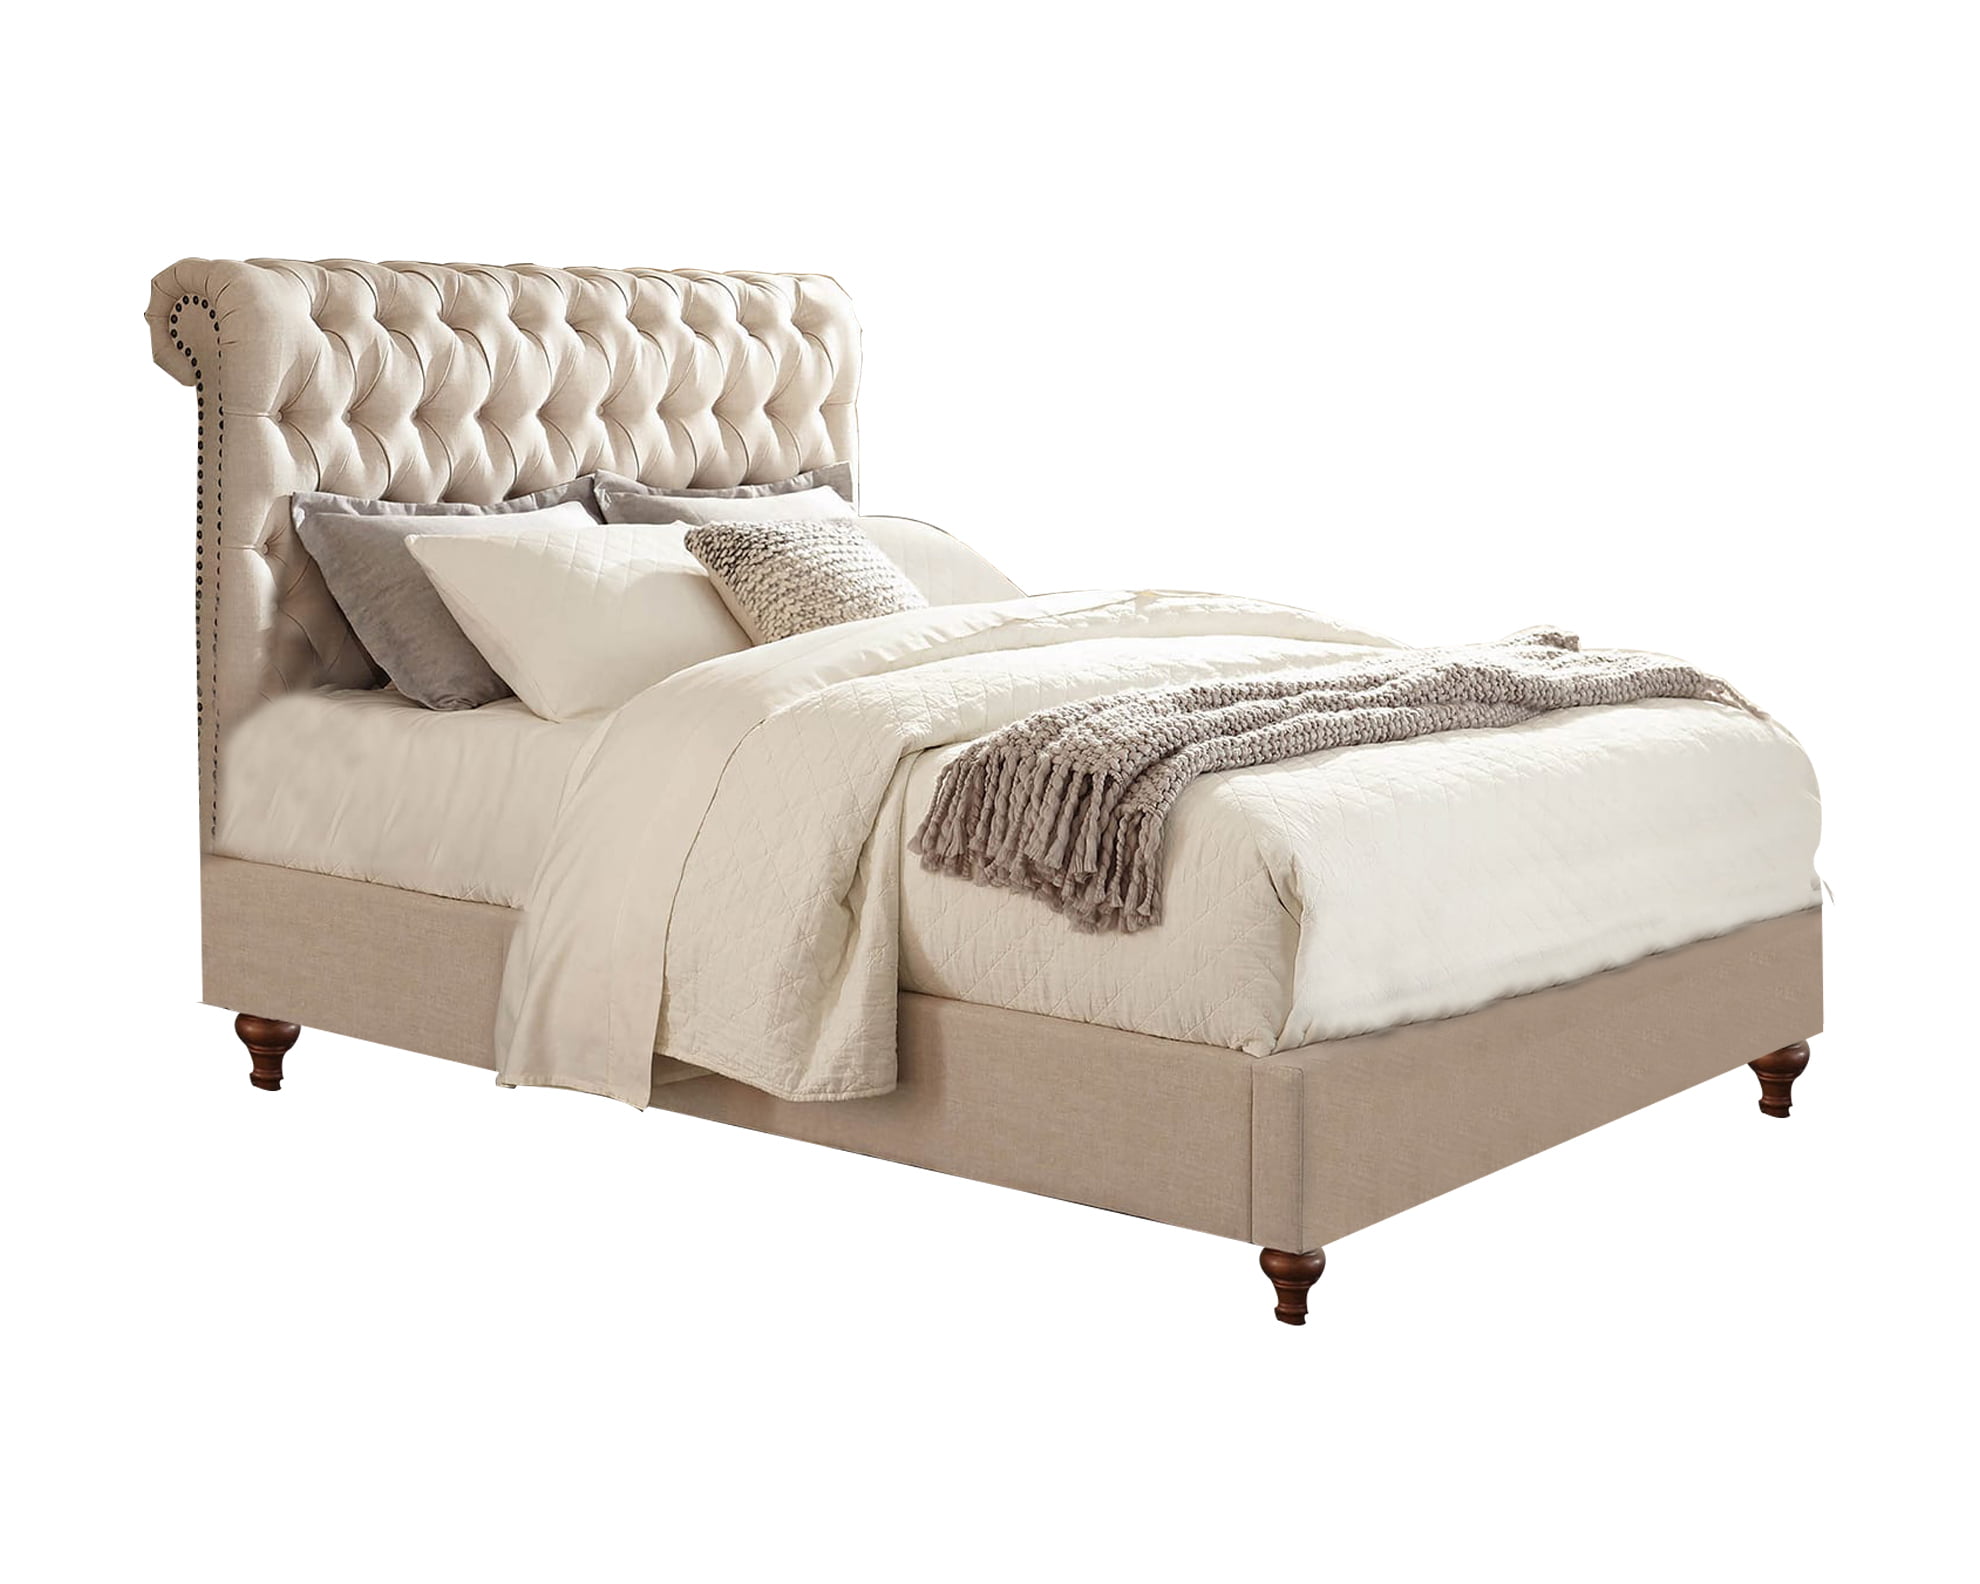 Wooden California King Size Bed with Button Tufted Headboard, Beige